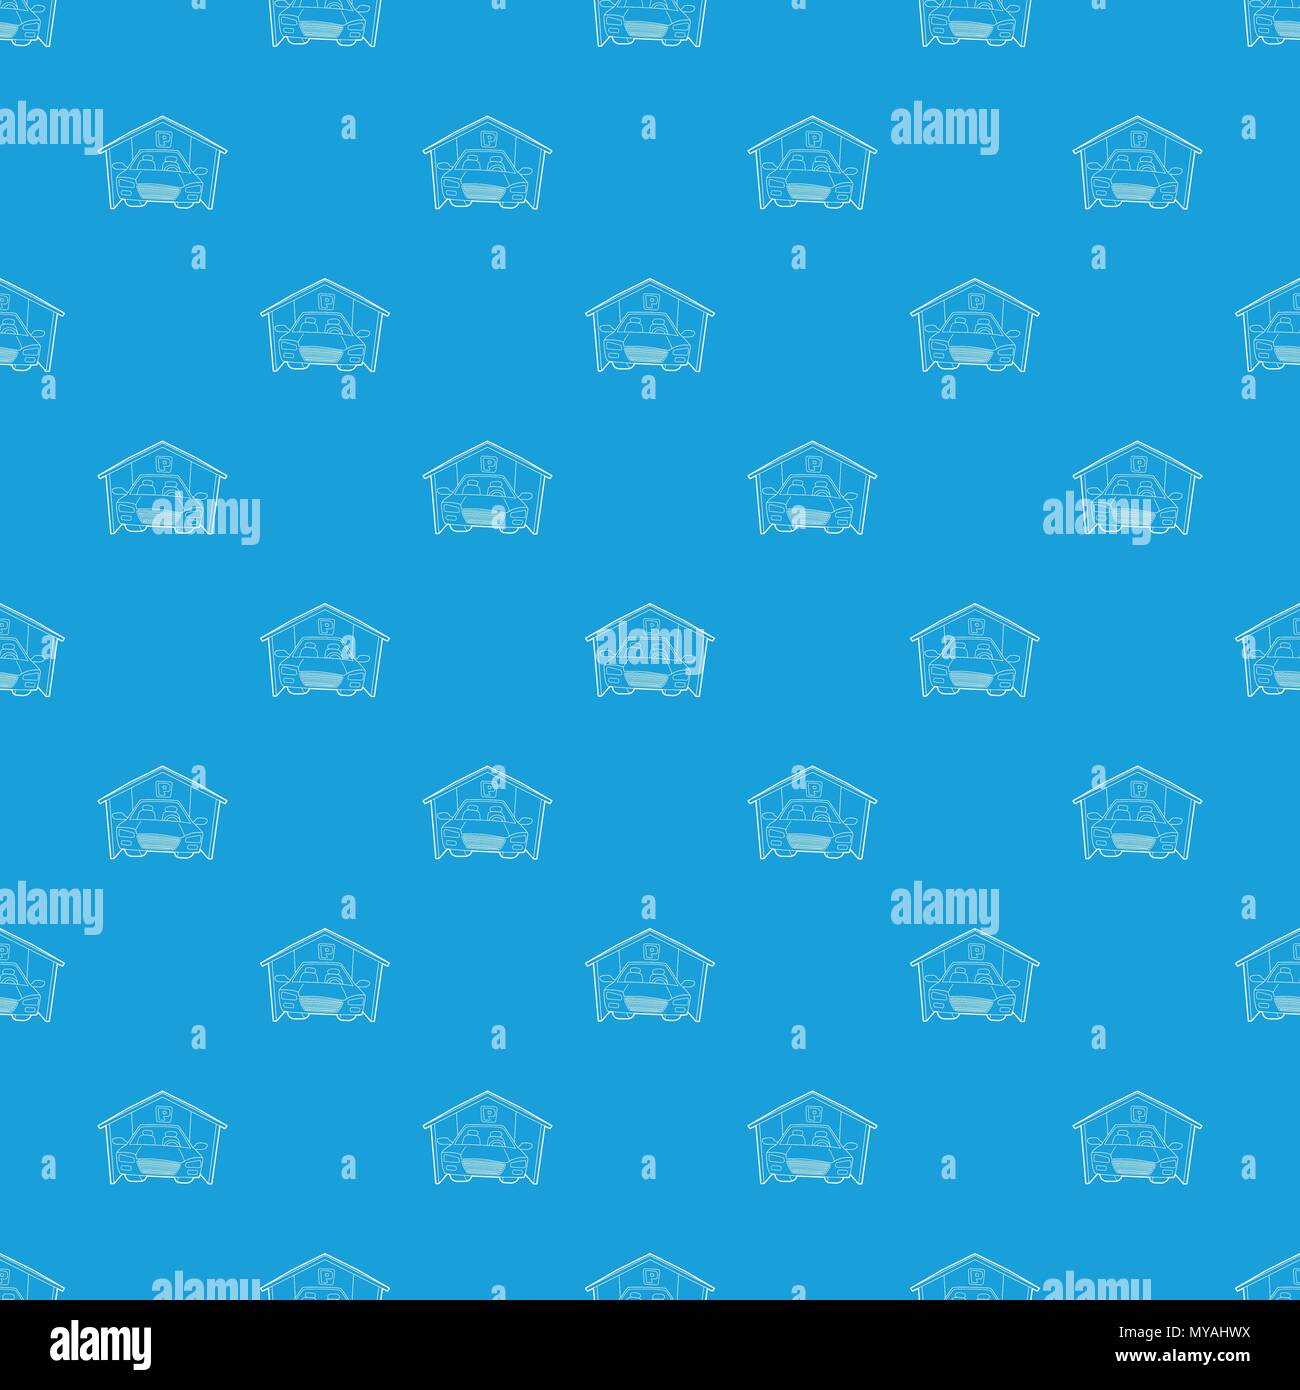 Covered car parking pattern vector seamless blue Stock Vector